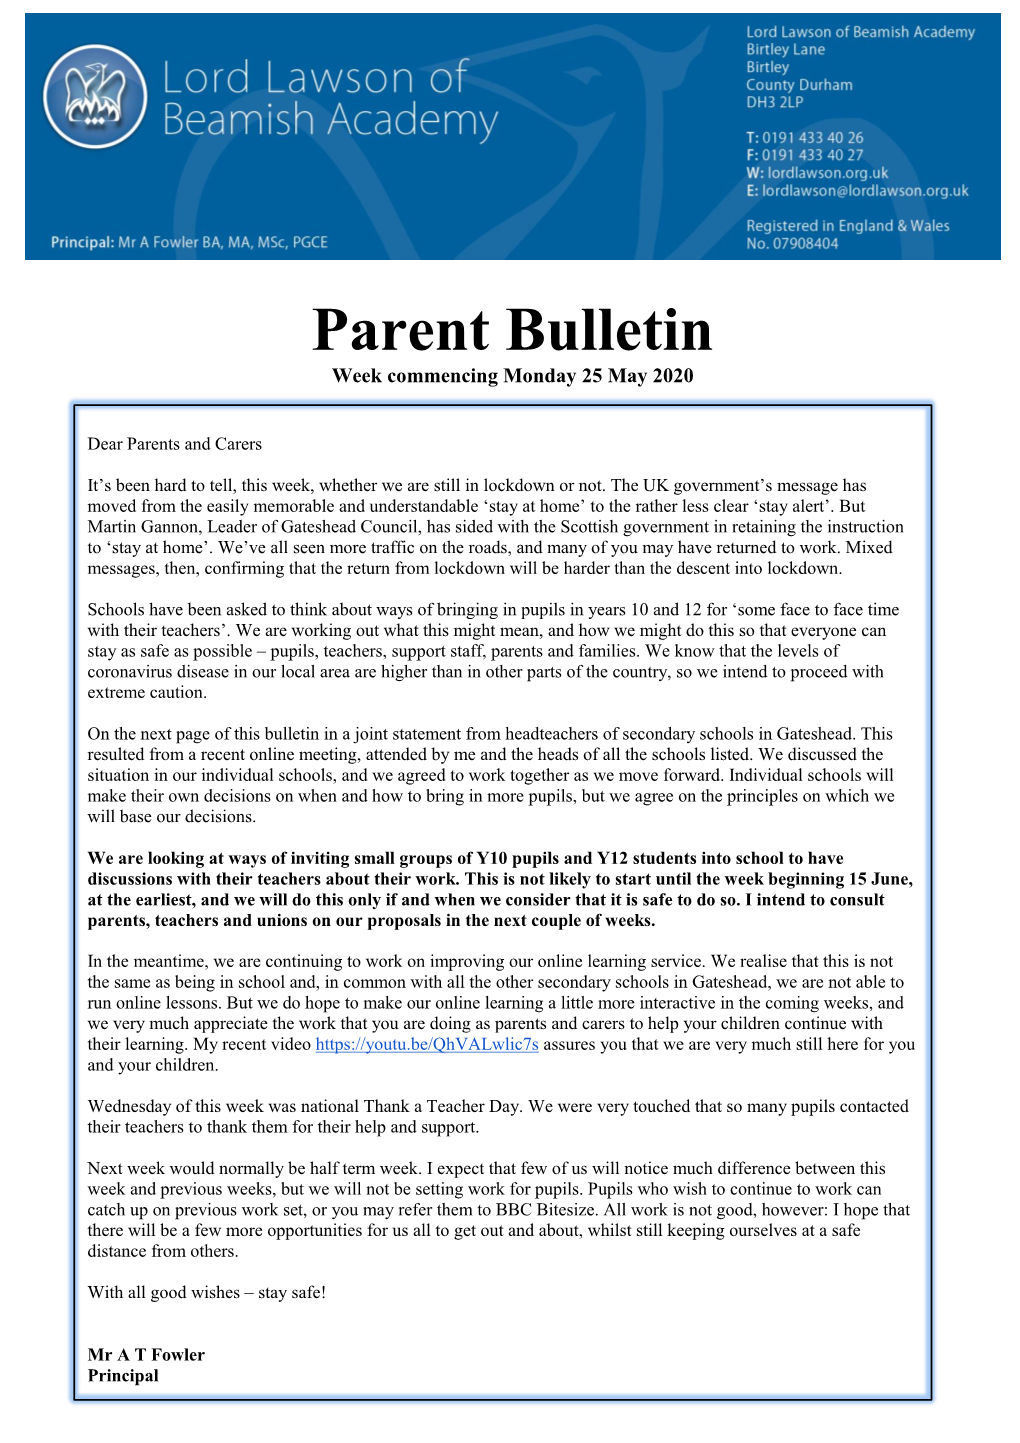 Parent Bulletin Week Commencing Monday 25 May 2020